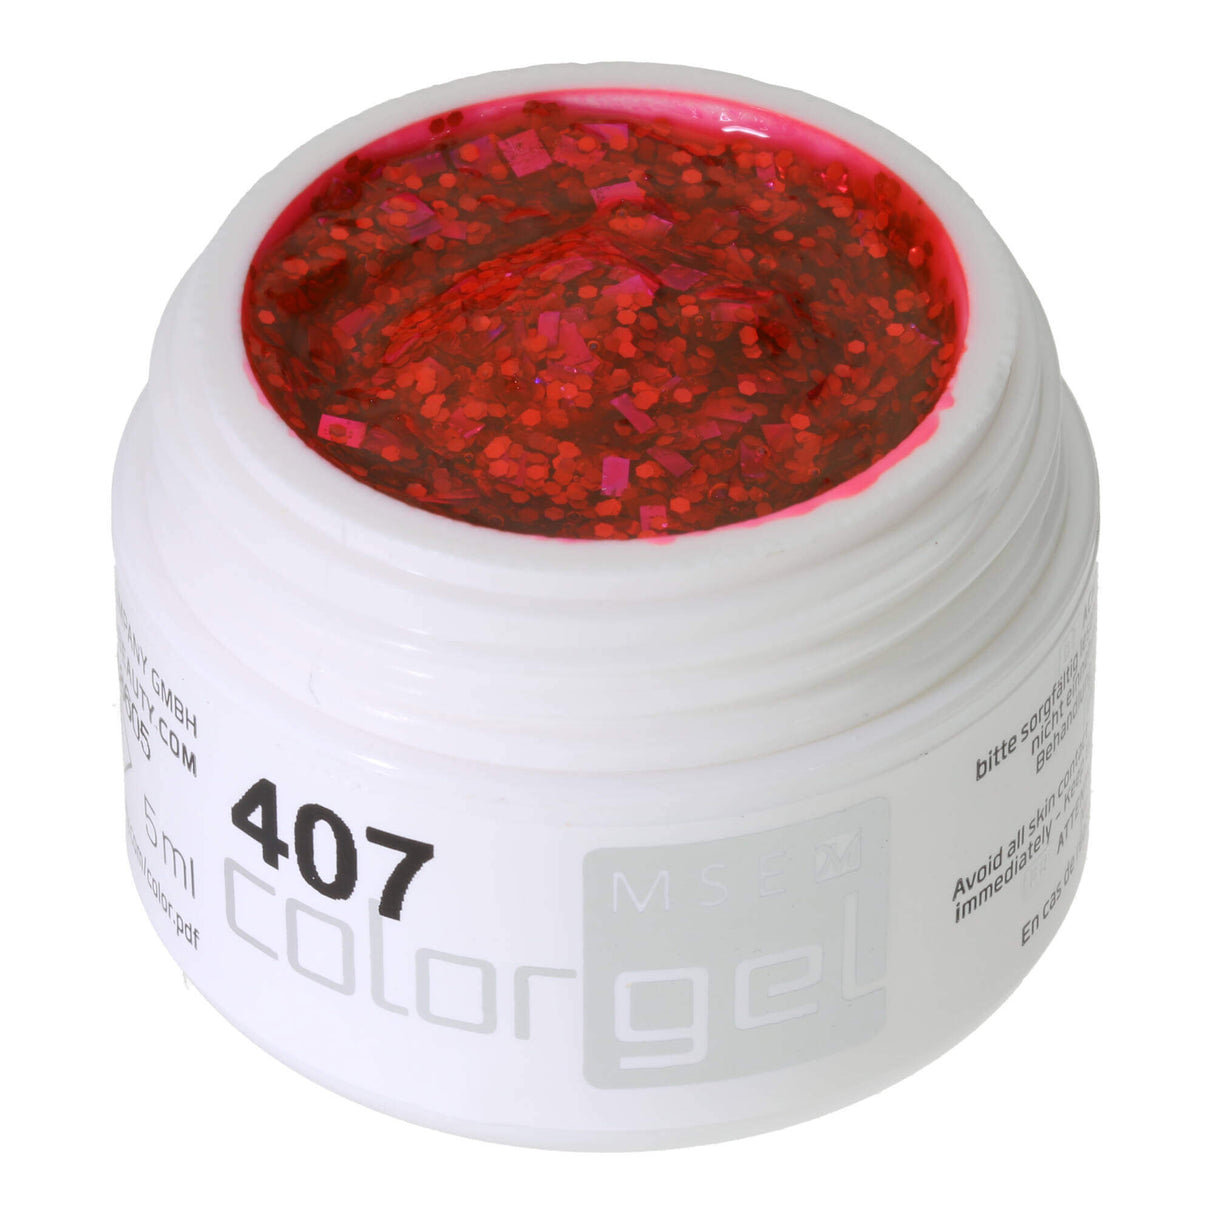 # 407 Premium-GLITTER Color Gel 5ml Gel made of orange and pink glitter particles in different shapes